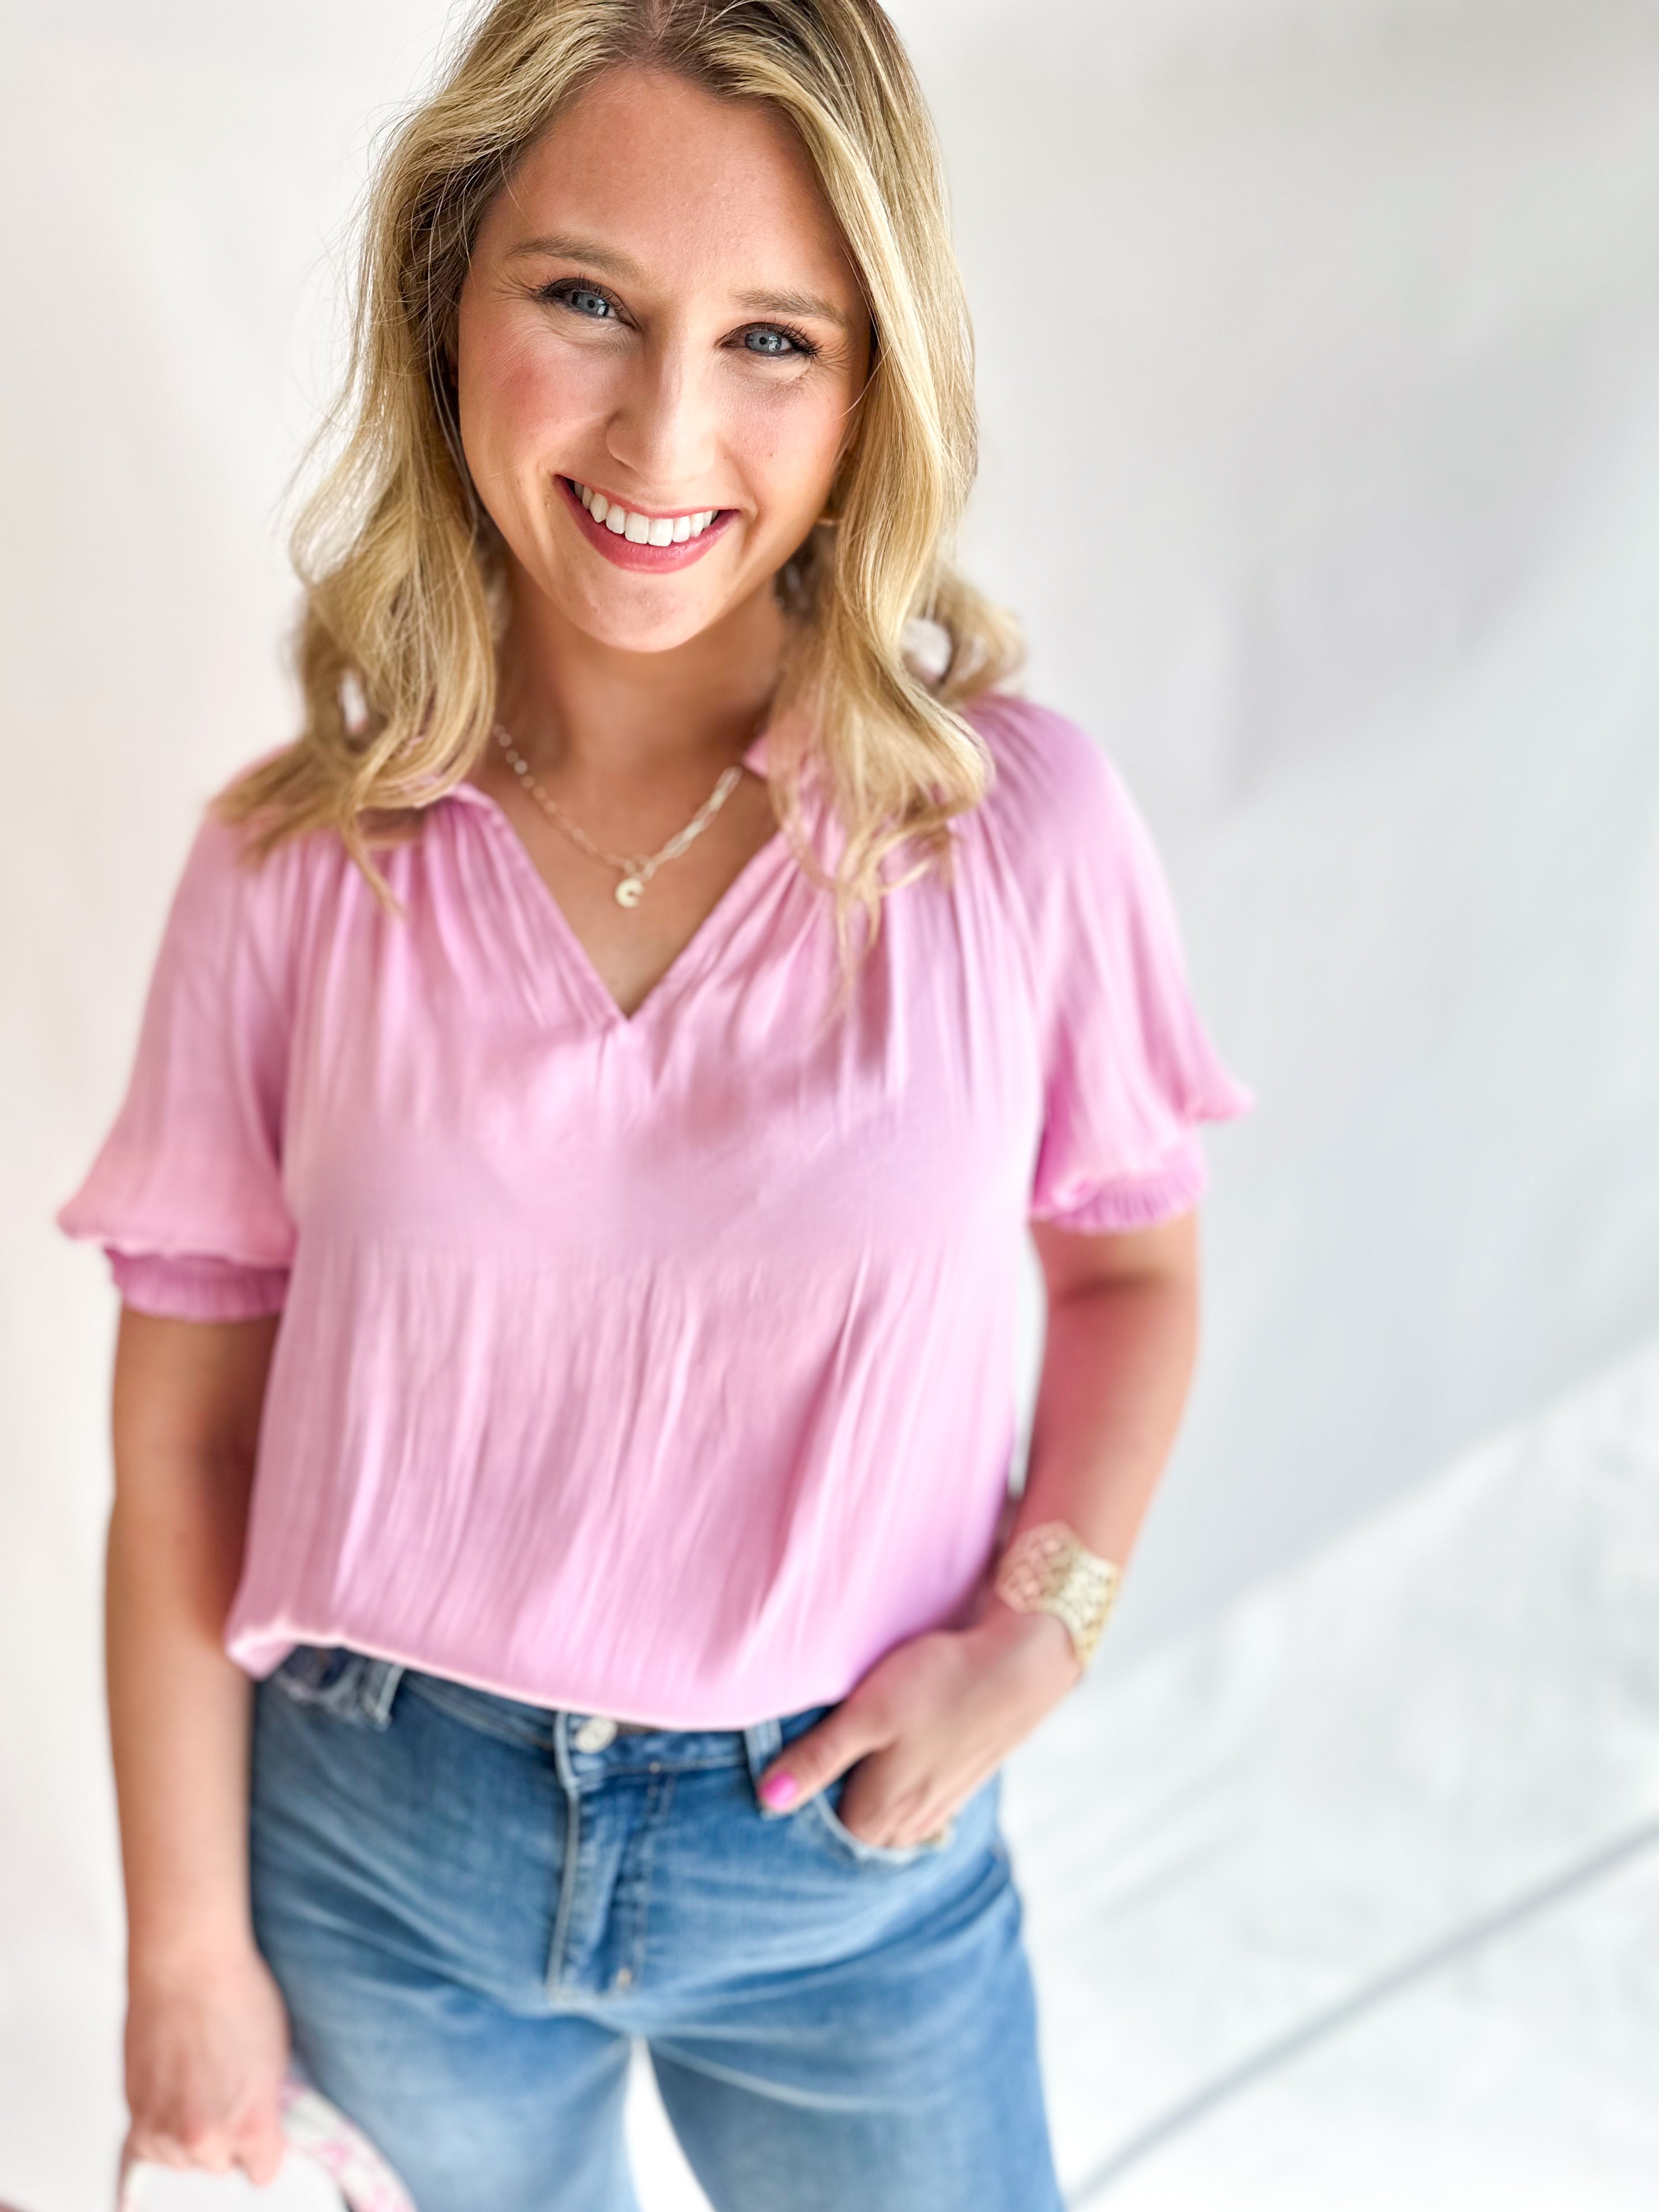 Pastel Pink Blouse-200 Fashion Blouses-CURRENT AIR CLOTHING-July & June Women's Fashion Boutique Located in San Antonio, Texas